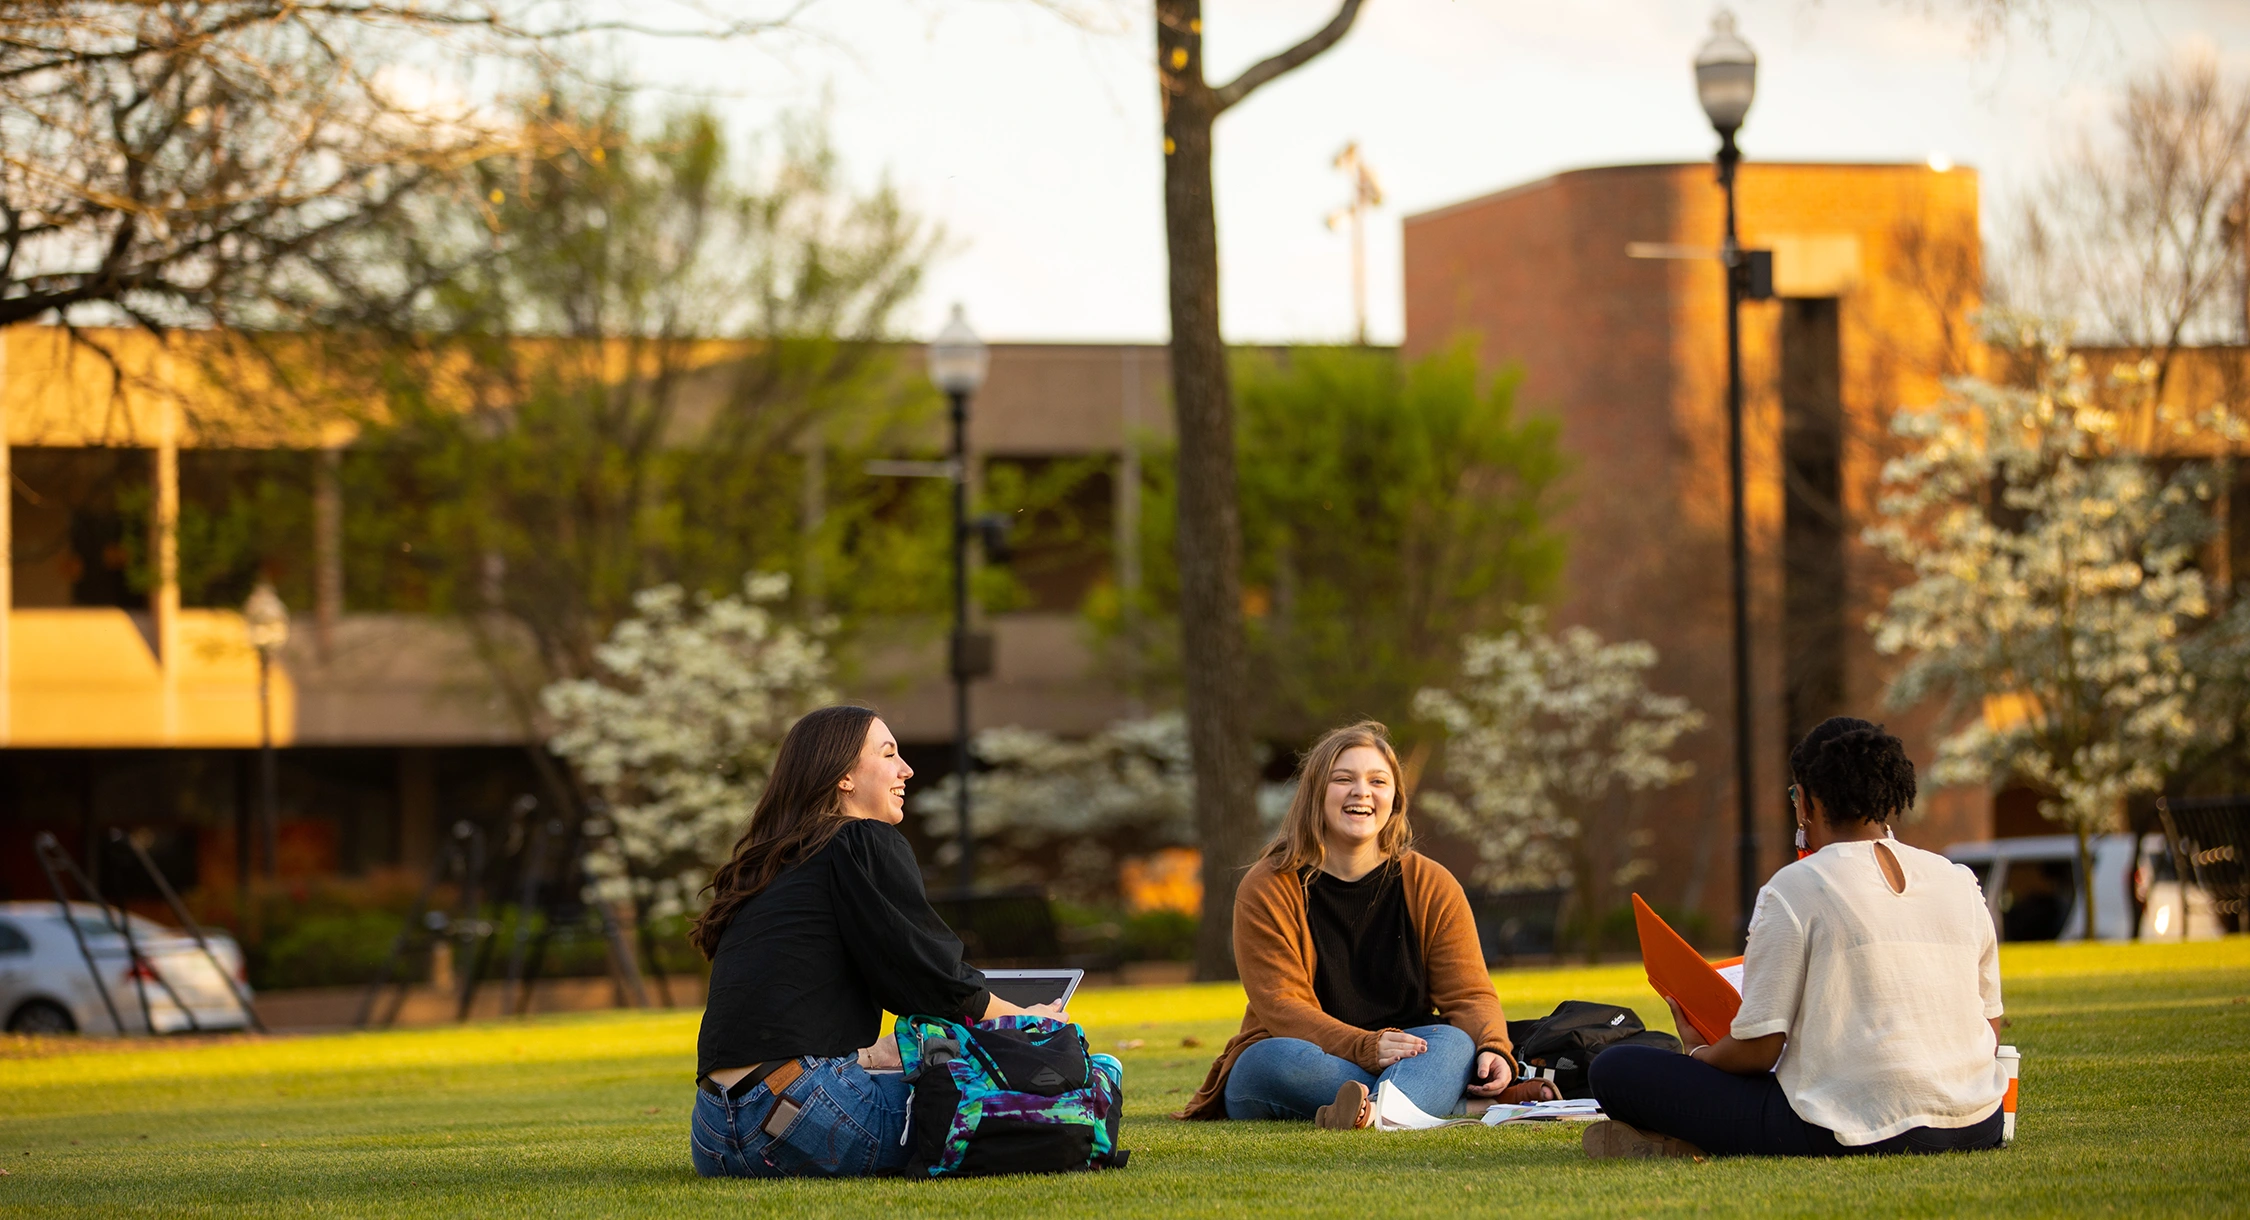 Students chatting on a lawn.